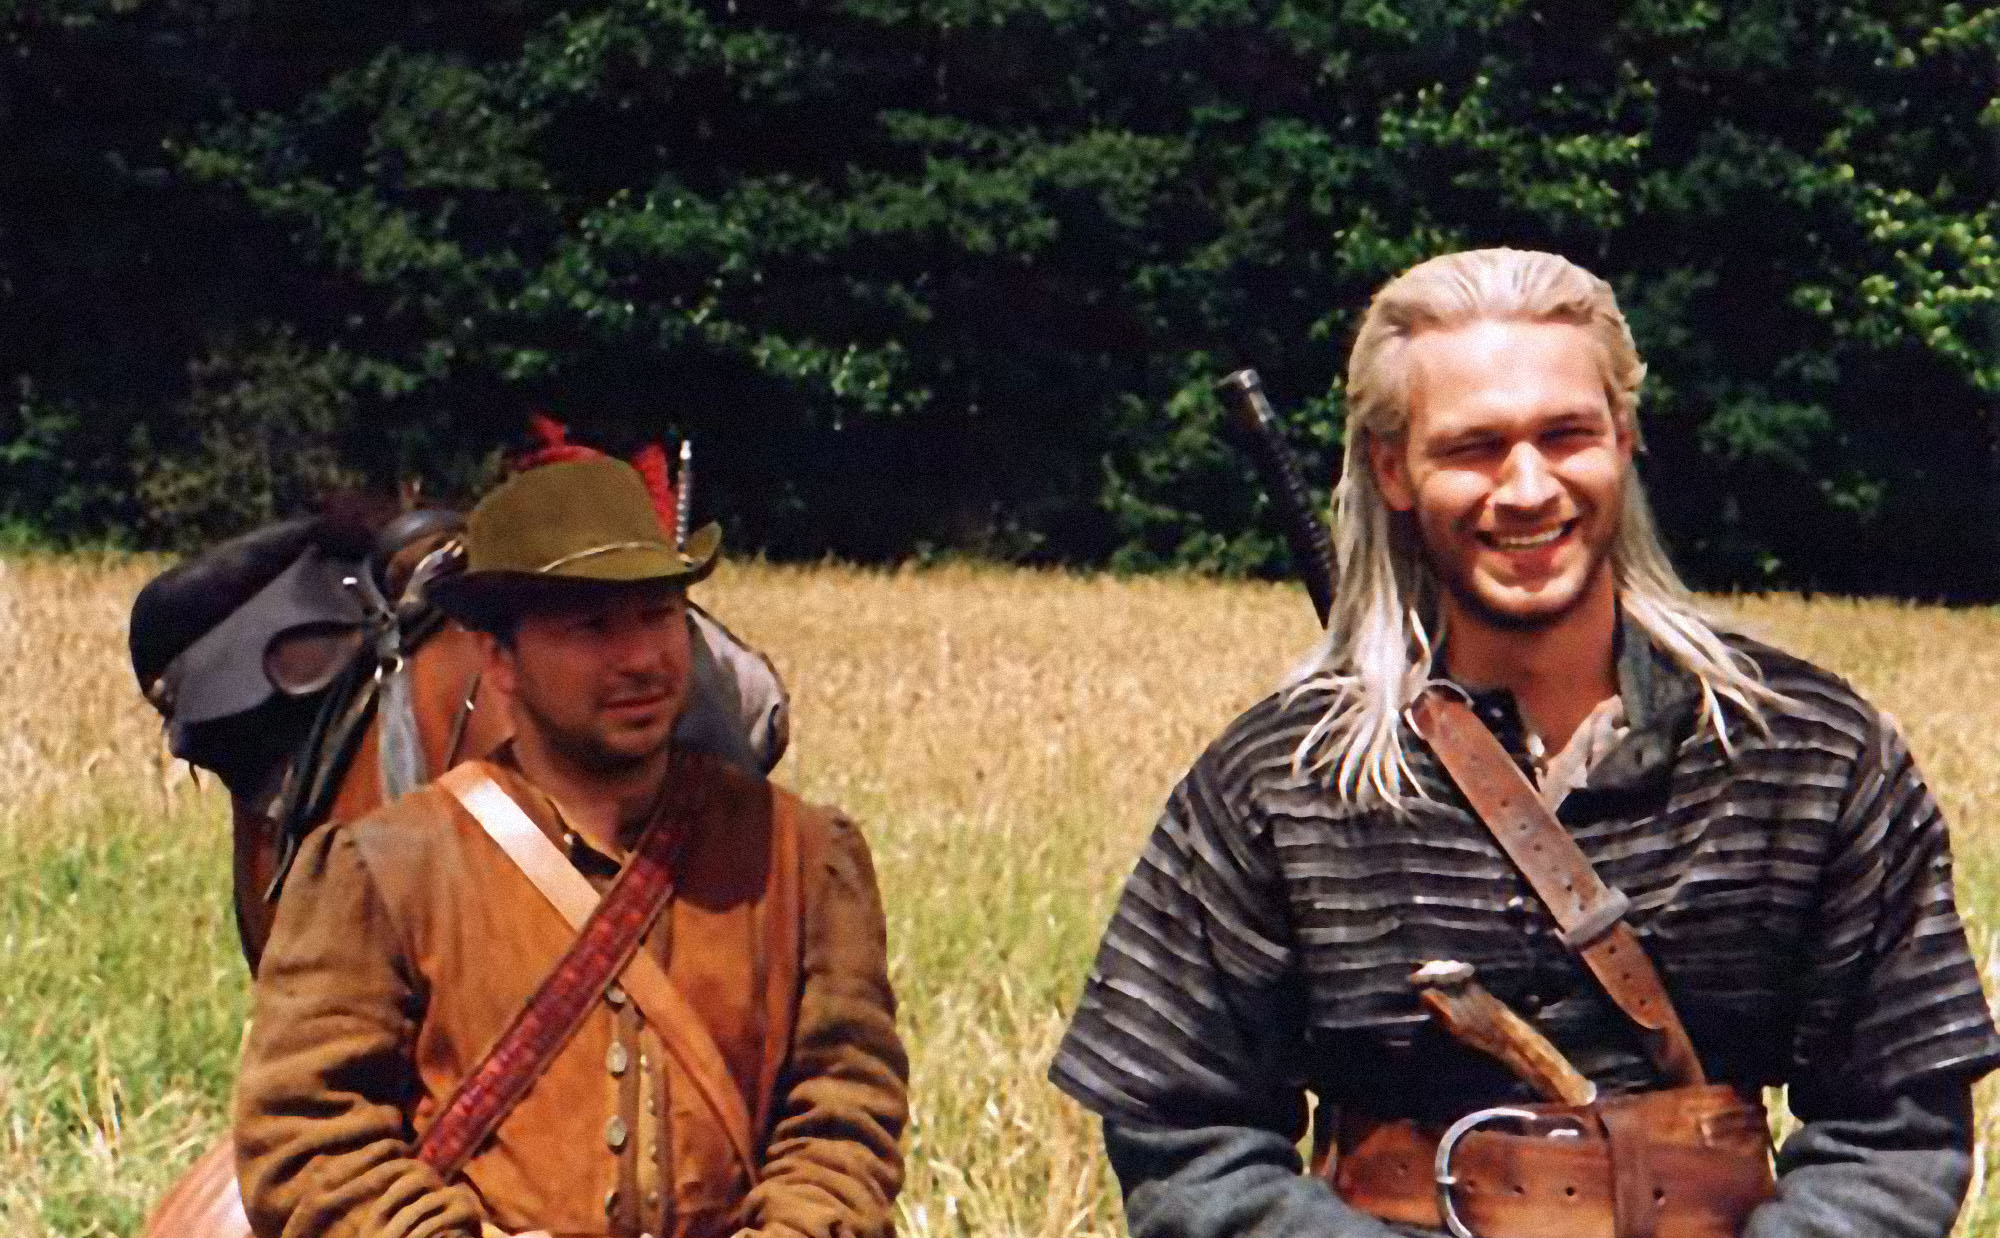 Zamachowski (Jaskier) and Zebrowski (Geralt) in the Polish original. The movie was strongly criticized, but you can’t deny its charm. (Fun fact – Zebrowski will be the voice of Johnny Silverhand in Cyberpunk 2077) - No Money? No Problem! Alzur's Legacy – the Ambitious, Independent Witcher Movie - dokument - 2019-10-01